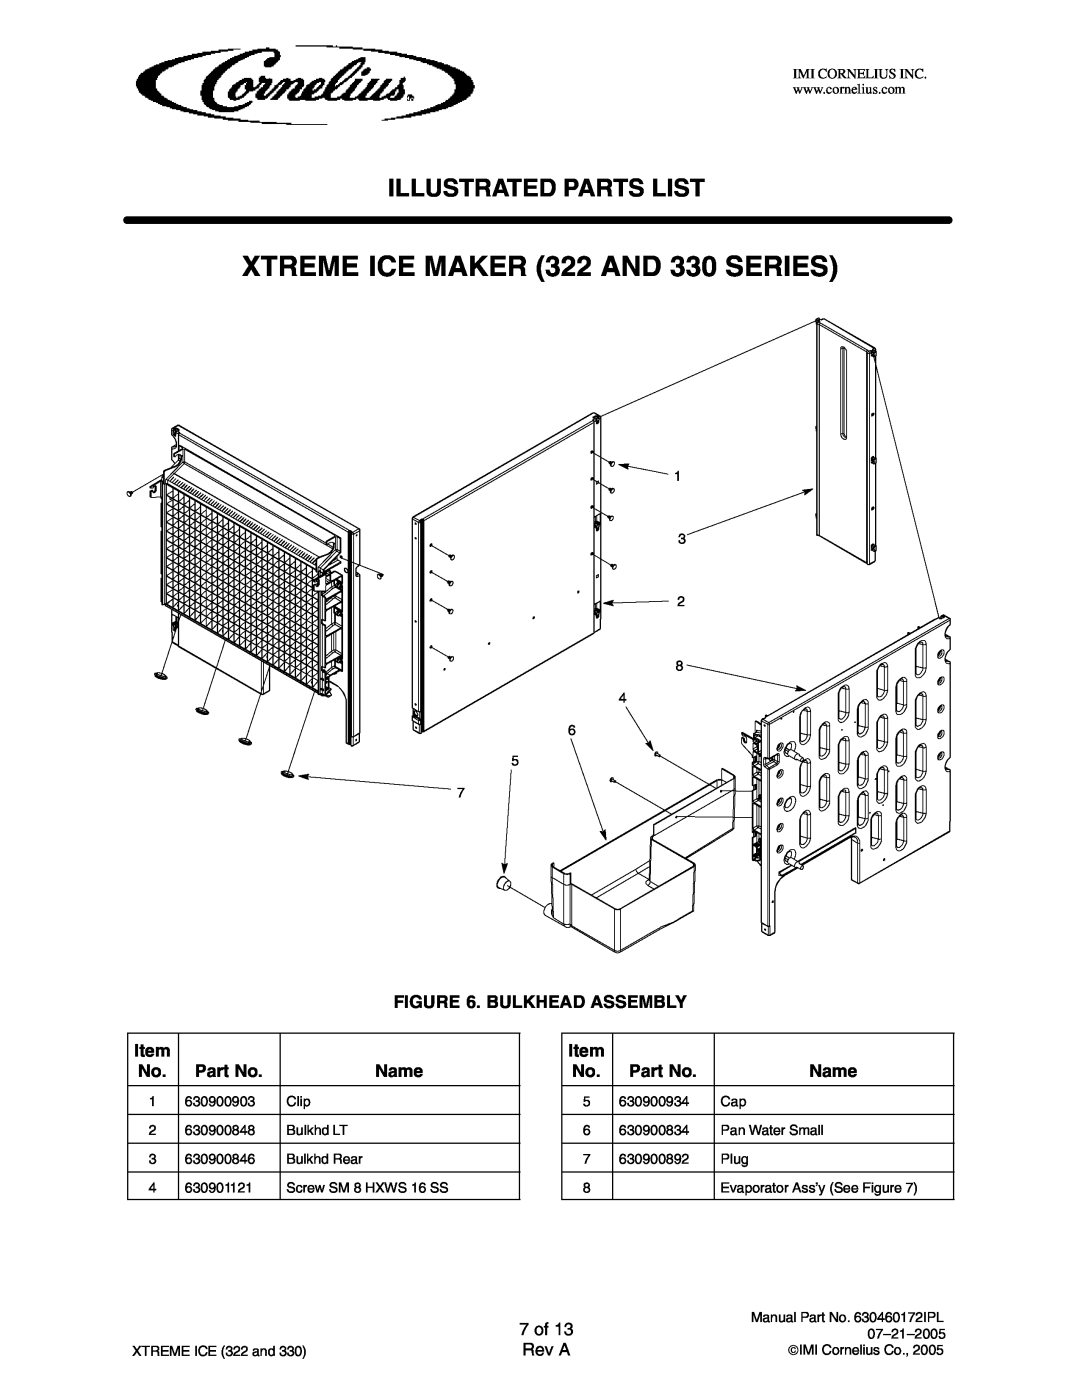 Cornelius 322 Series 7 of, XTREME ICE MAKER 322 AND 330 SERIES, Illustrated Parts List, Bulkhead Assembly, Name, Rev A 